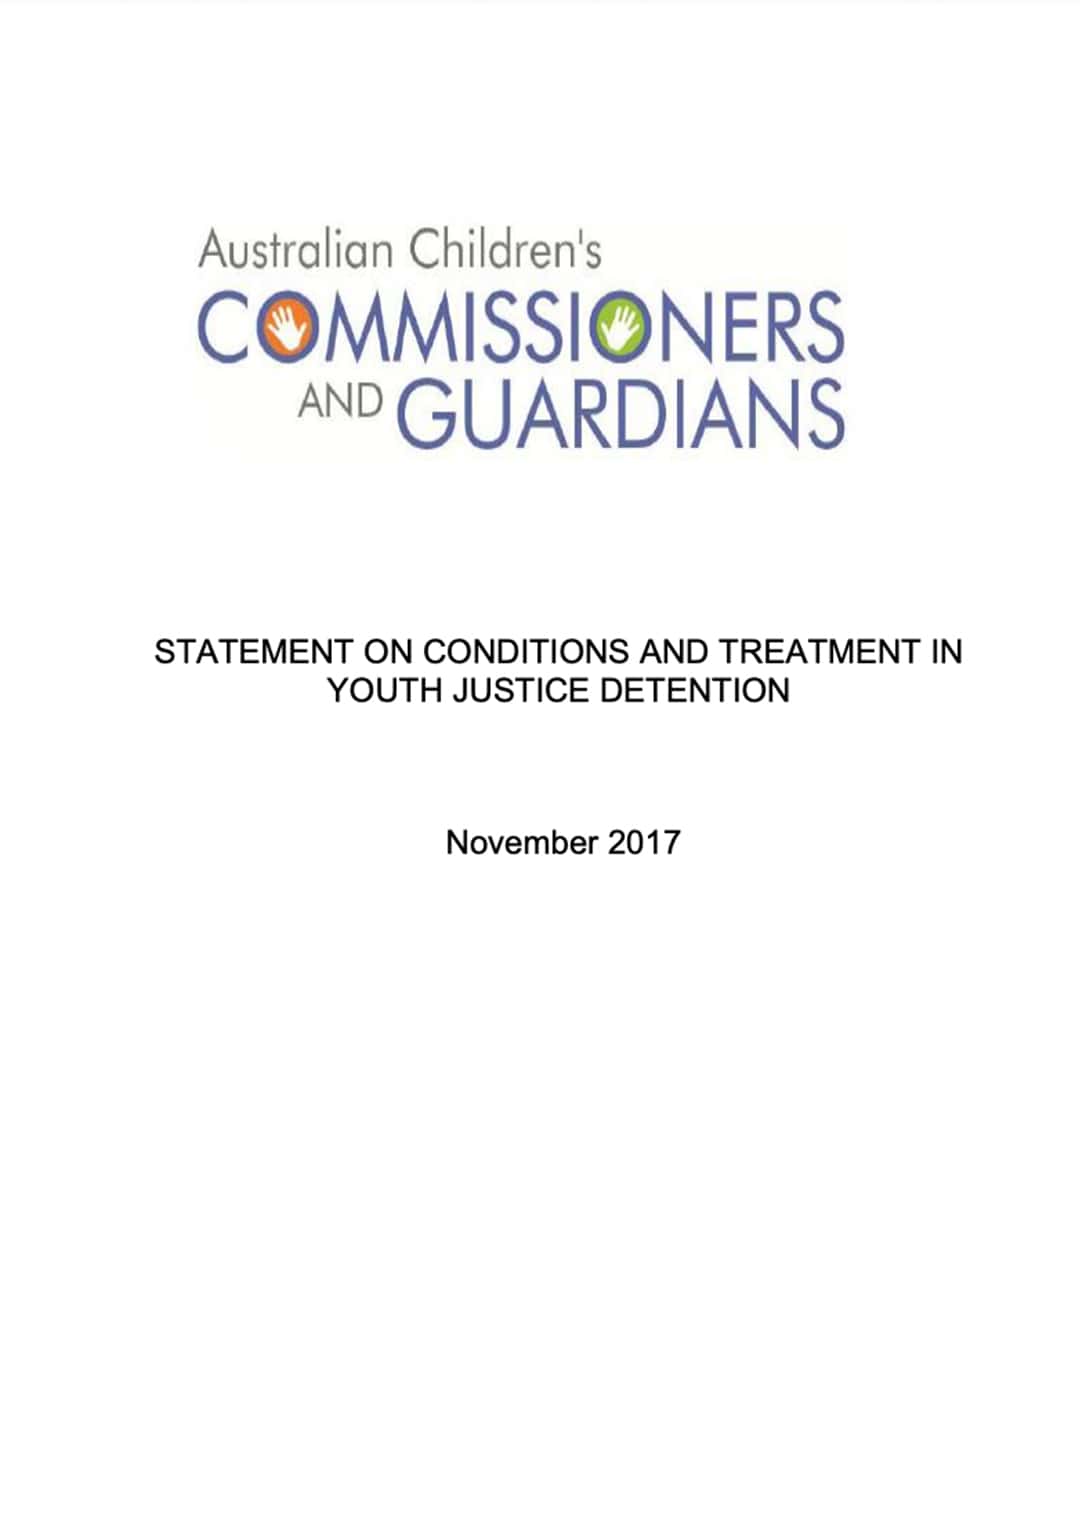 ACCG Statement on Conditions and Treatment in Youth Justice Detention